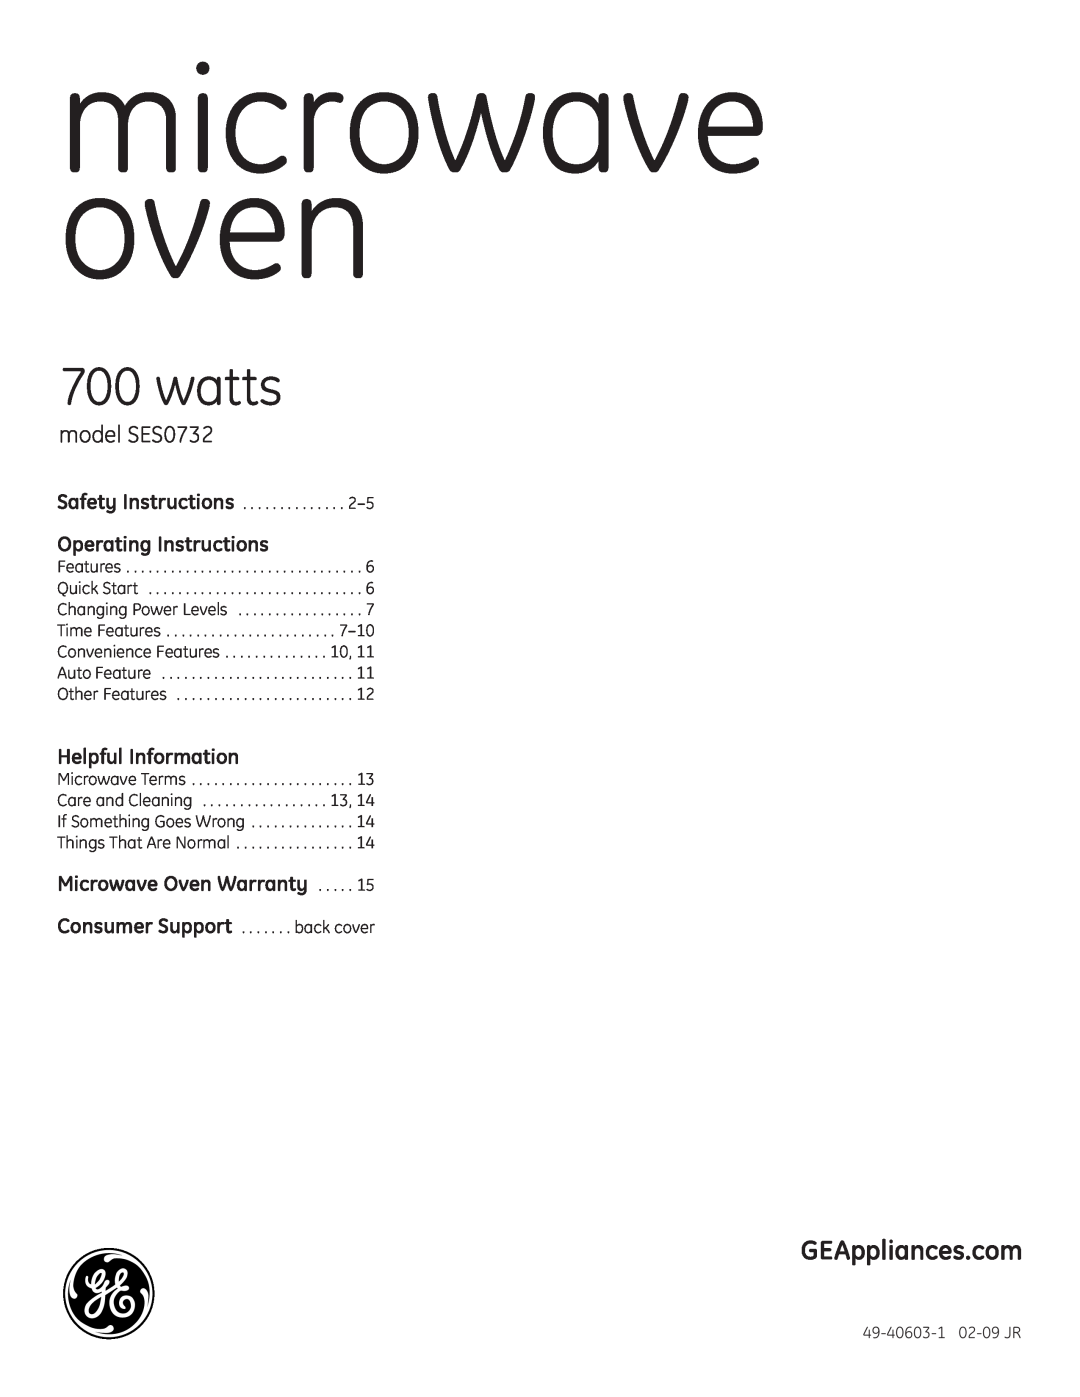 GE SES0732 quick start Operating Instructions, Helpful Information, Microwave Oven Warranty, microwave oven, watts 